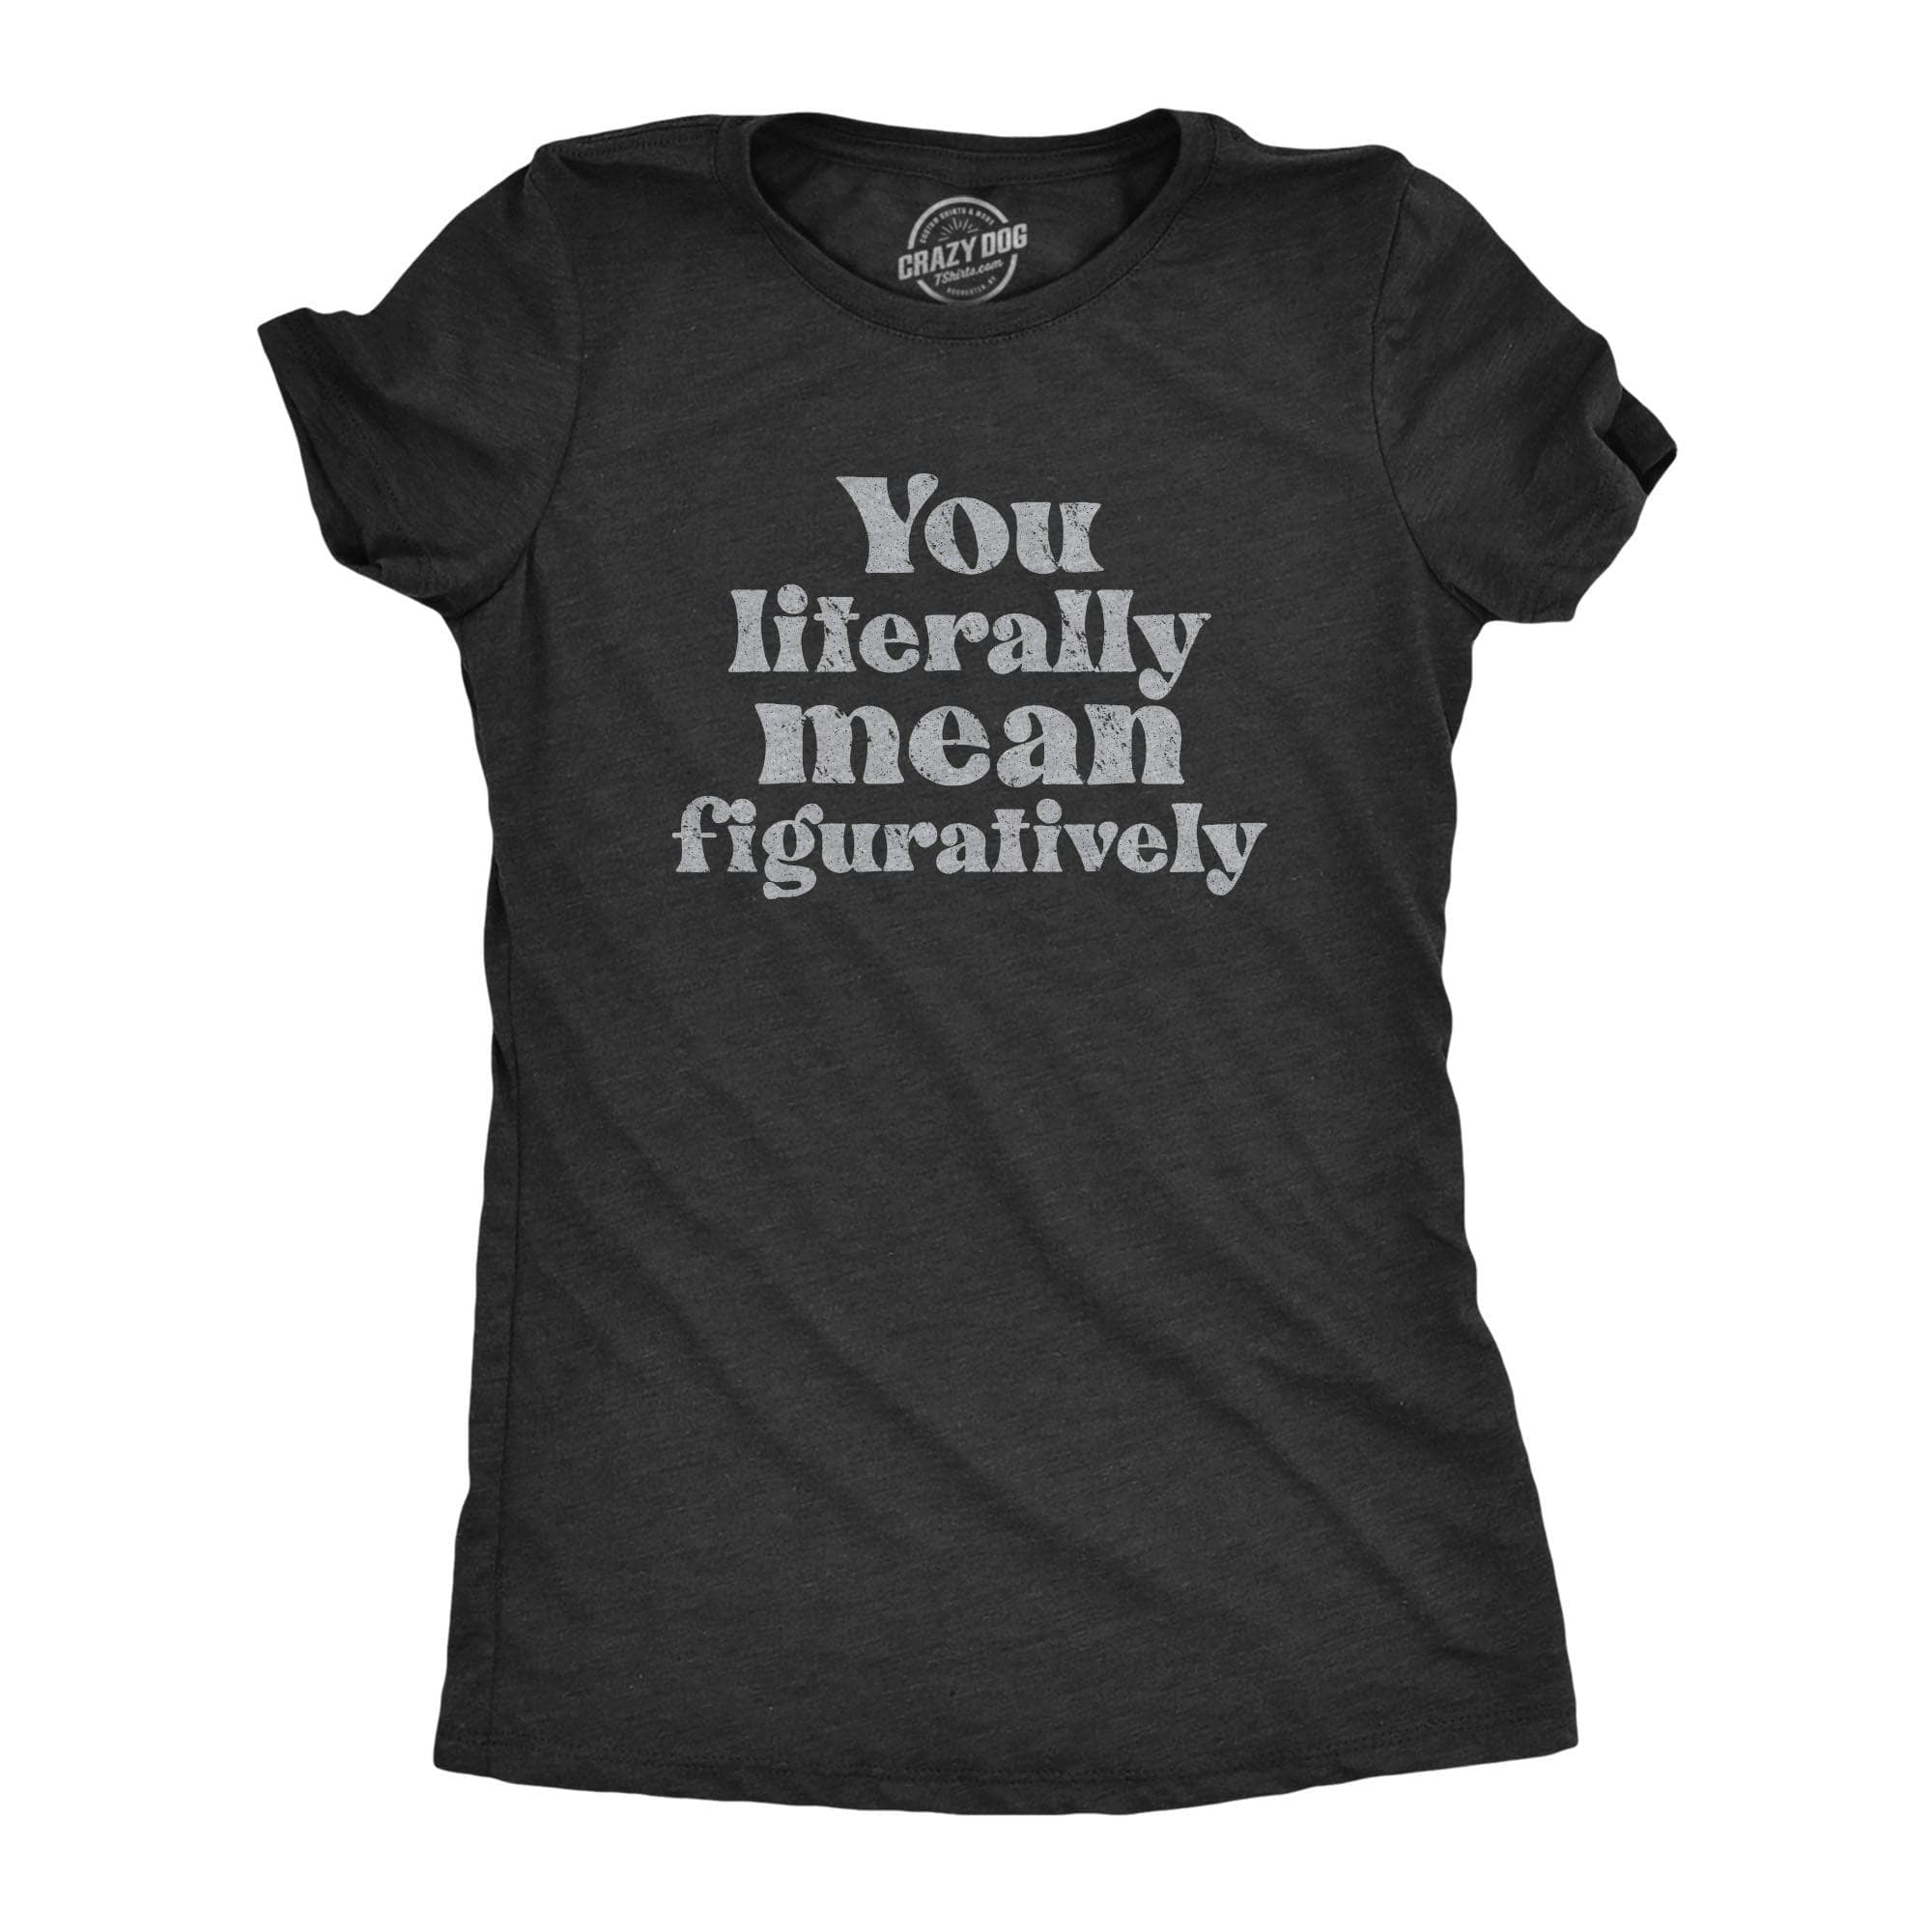 You Literally Mean Figuratively Women's Tshirt  -  Crazy Dog T-Shirts